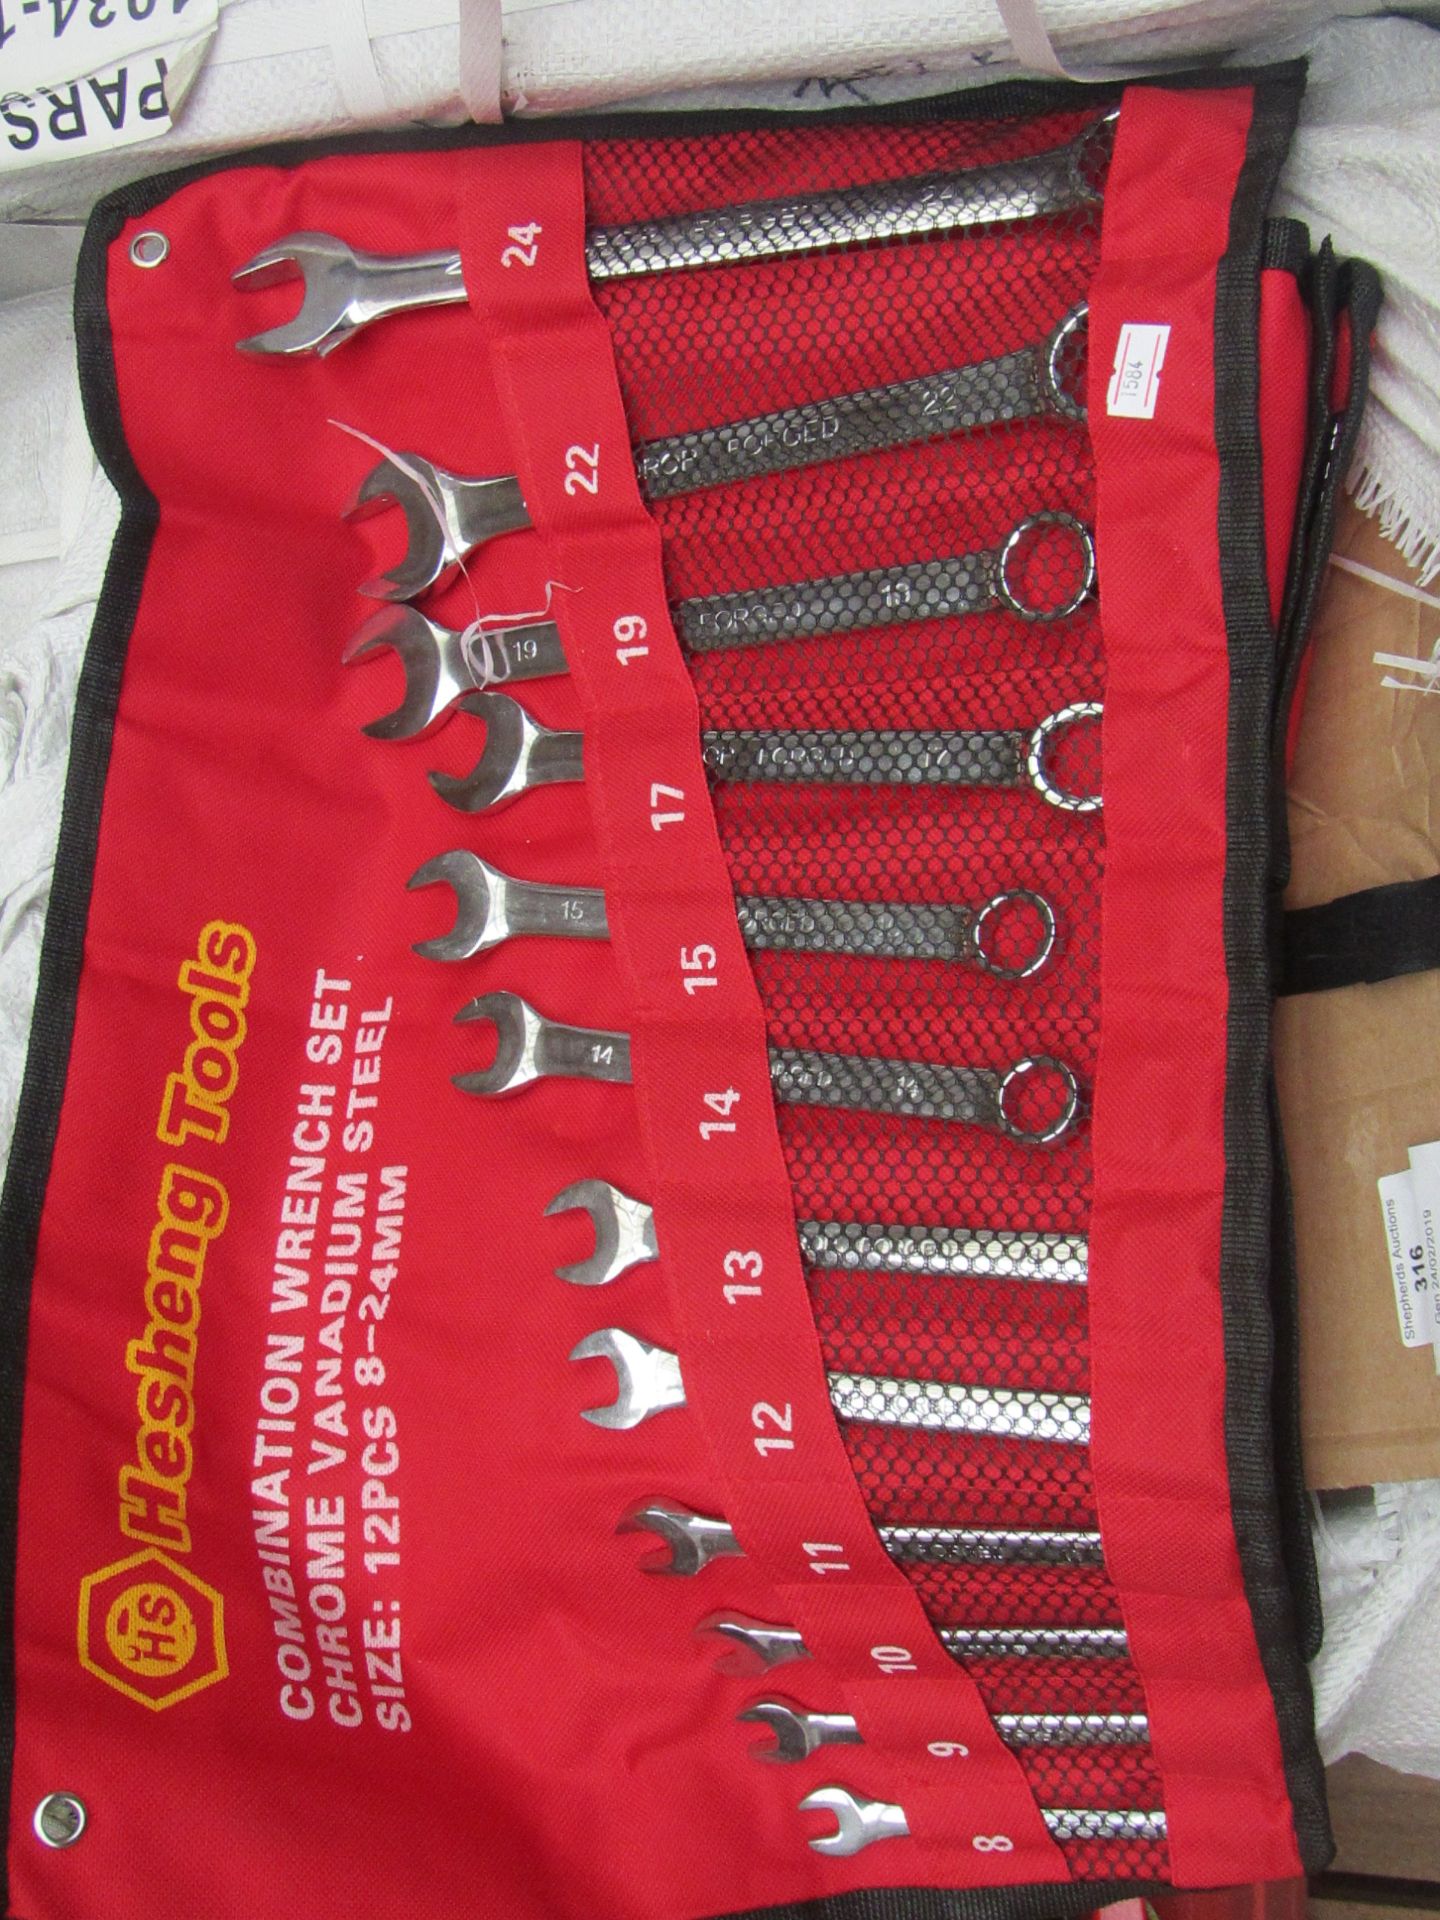 Hesheng Tools Combination Wrench set   12 Pieces 8-24 MM new